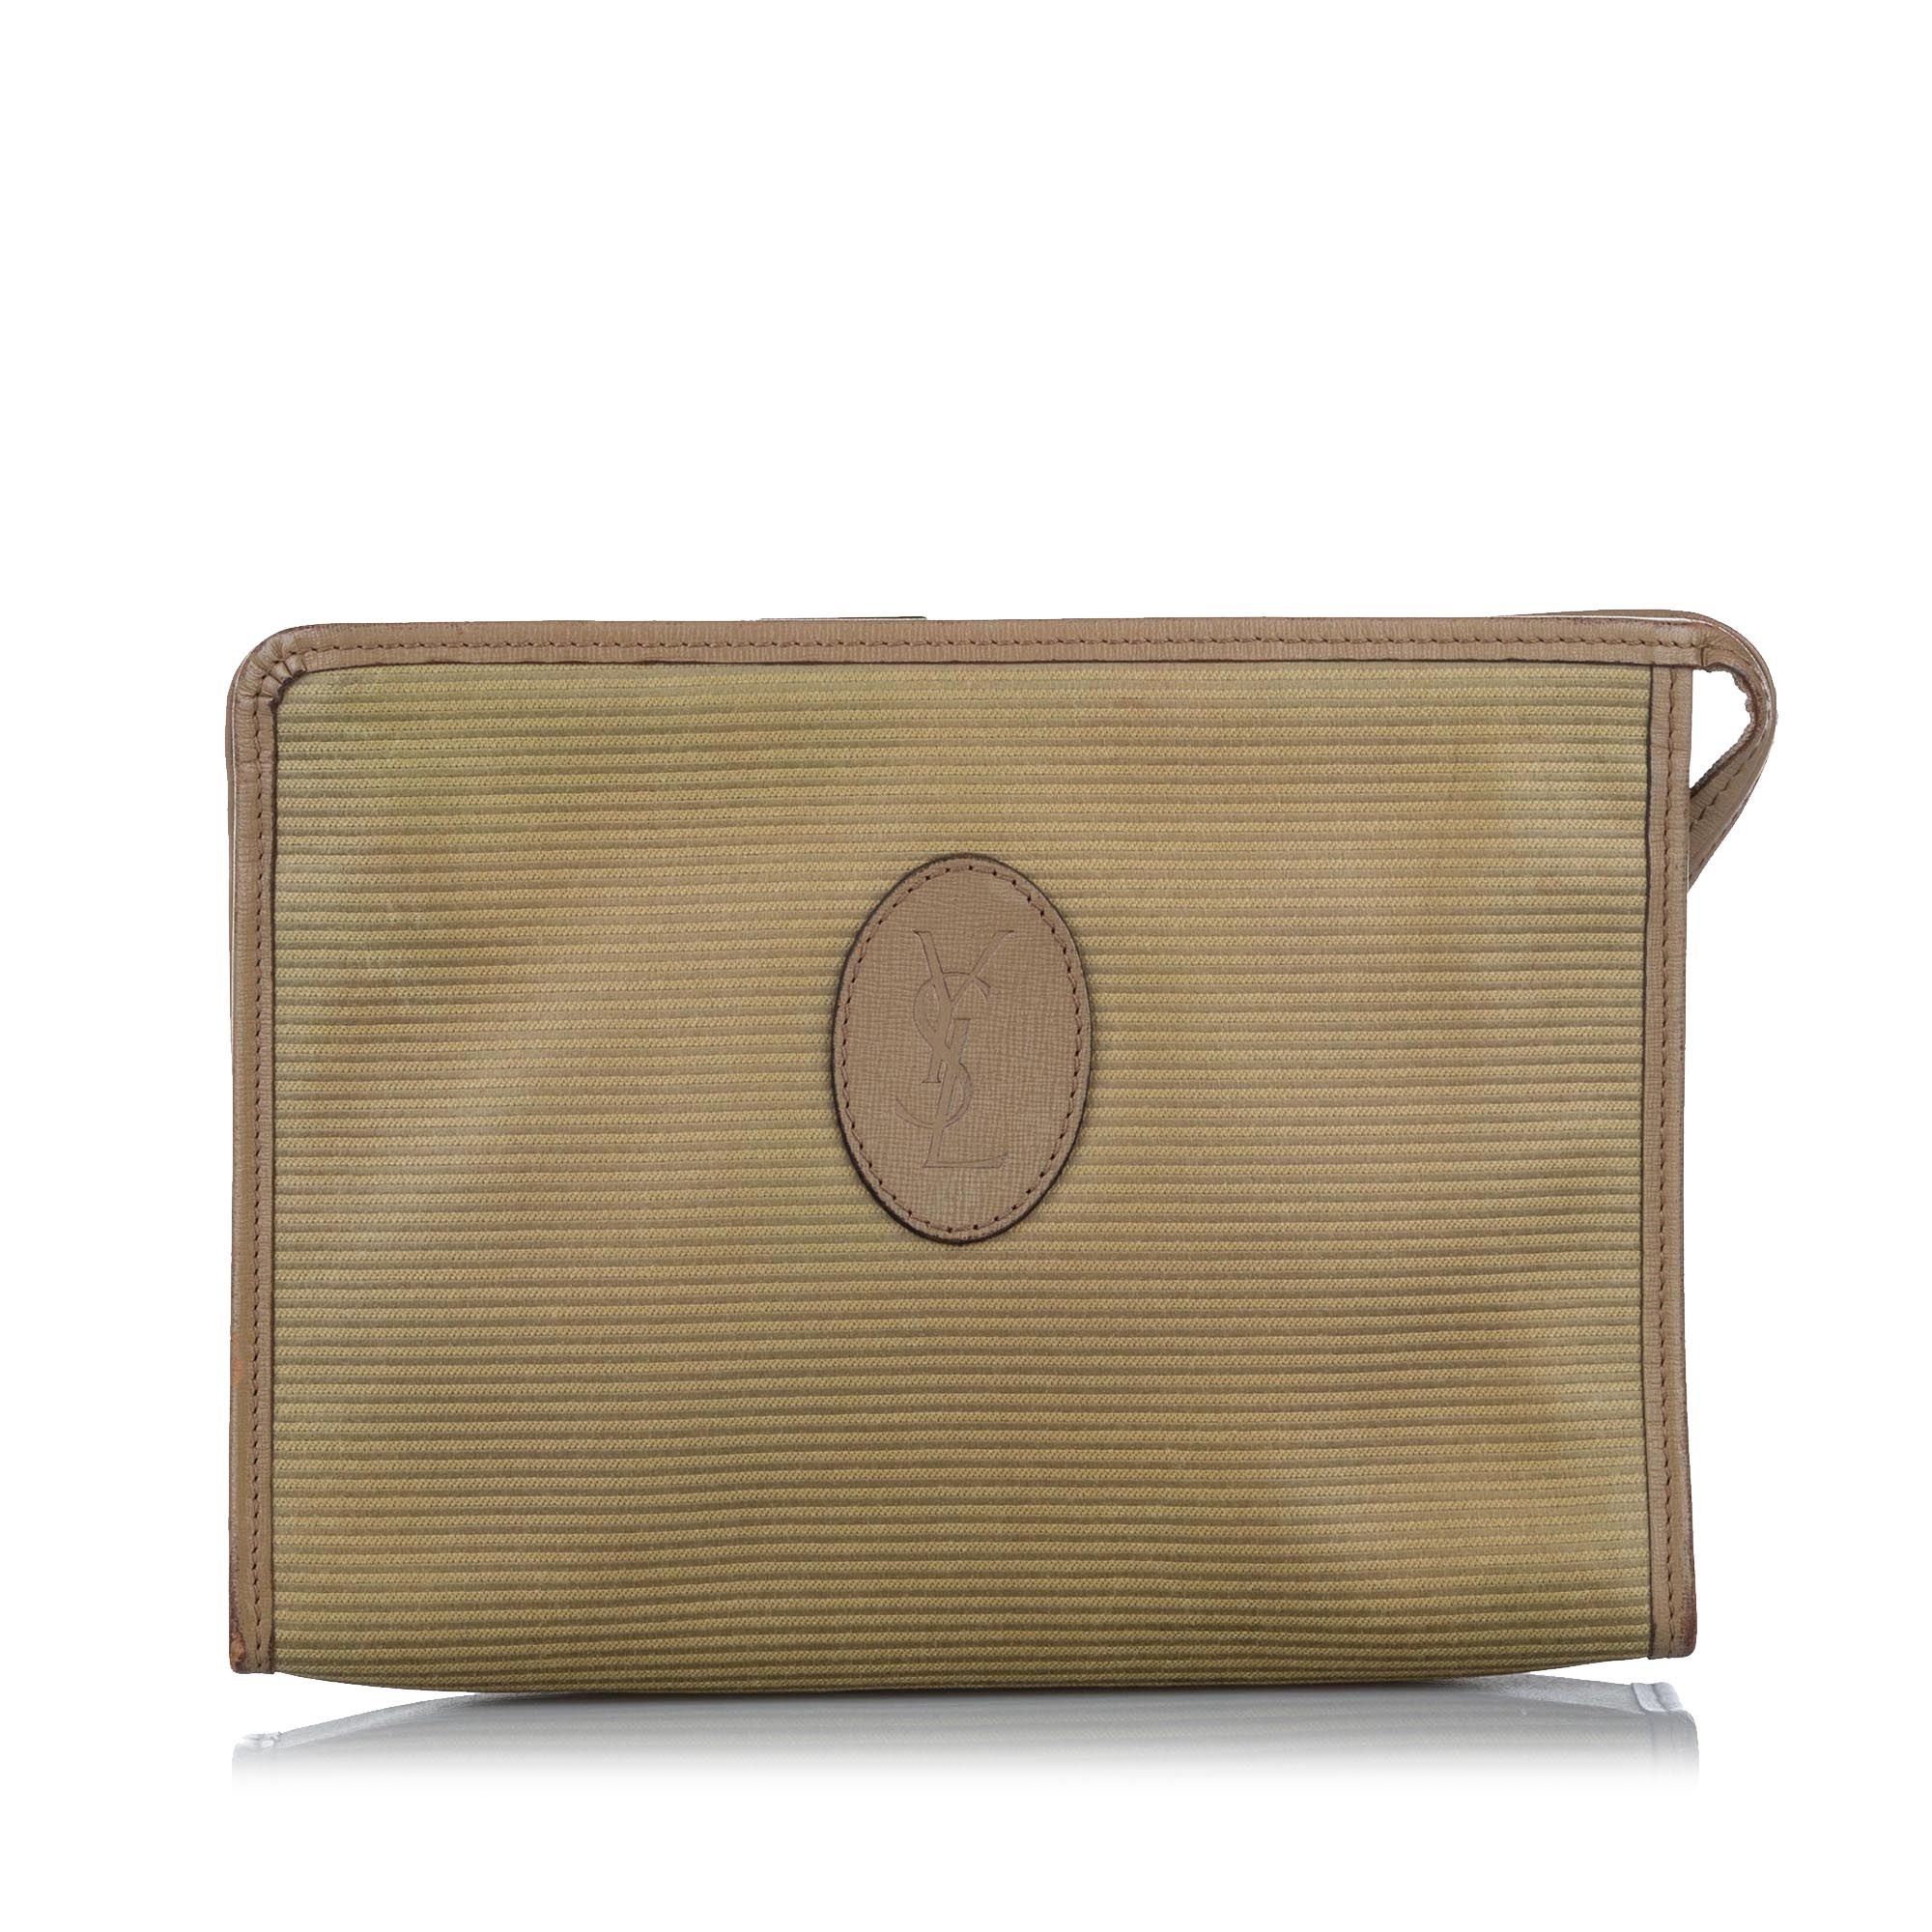 VINTAGE. RRP AS NEW. This clutch features a canvas body with leather trim, a top zip closure, and an interior slip pocket.Exterior back is discolored and stained. Exterior bottom is discolored. Exterior corners is discolored. Exterior front is discolored and stained. Exterior side is discolored. Zipper is scratched and tarnished. Interior lining is discolored. Interior pocket is discolored.

Dimensions:
Length 18cm
Width 25cm
Depth 7cm

Original Accessories: This item has no other original accessories.

Serial Number: B1
Color: Brown x Beige
Material: Fabric x Canvas x Leather x Calf
Country of Origin: FRANCE
Boutique Reference: SSU165321K1342


Product Rating: FairCondition

Certificate of Authenticity is available upon request with no extra fee required. Please contact our customer service team.